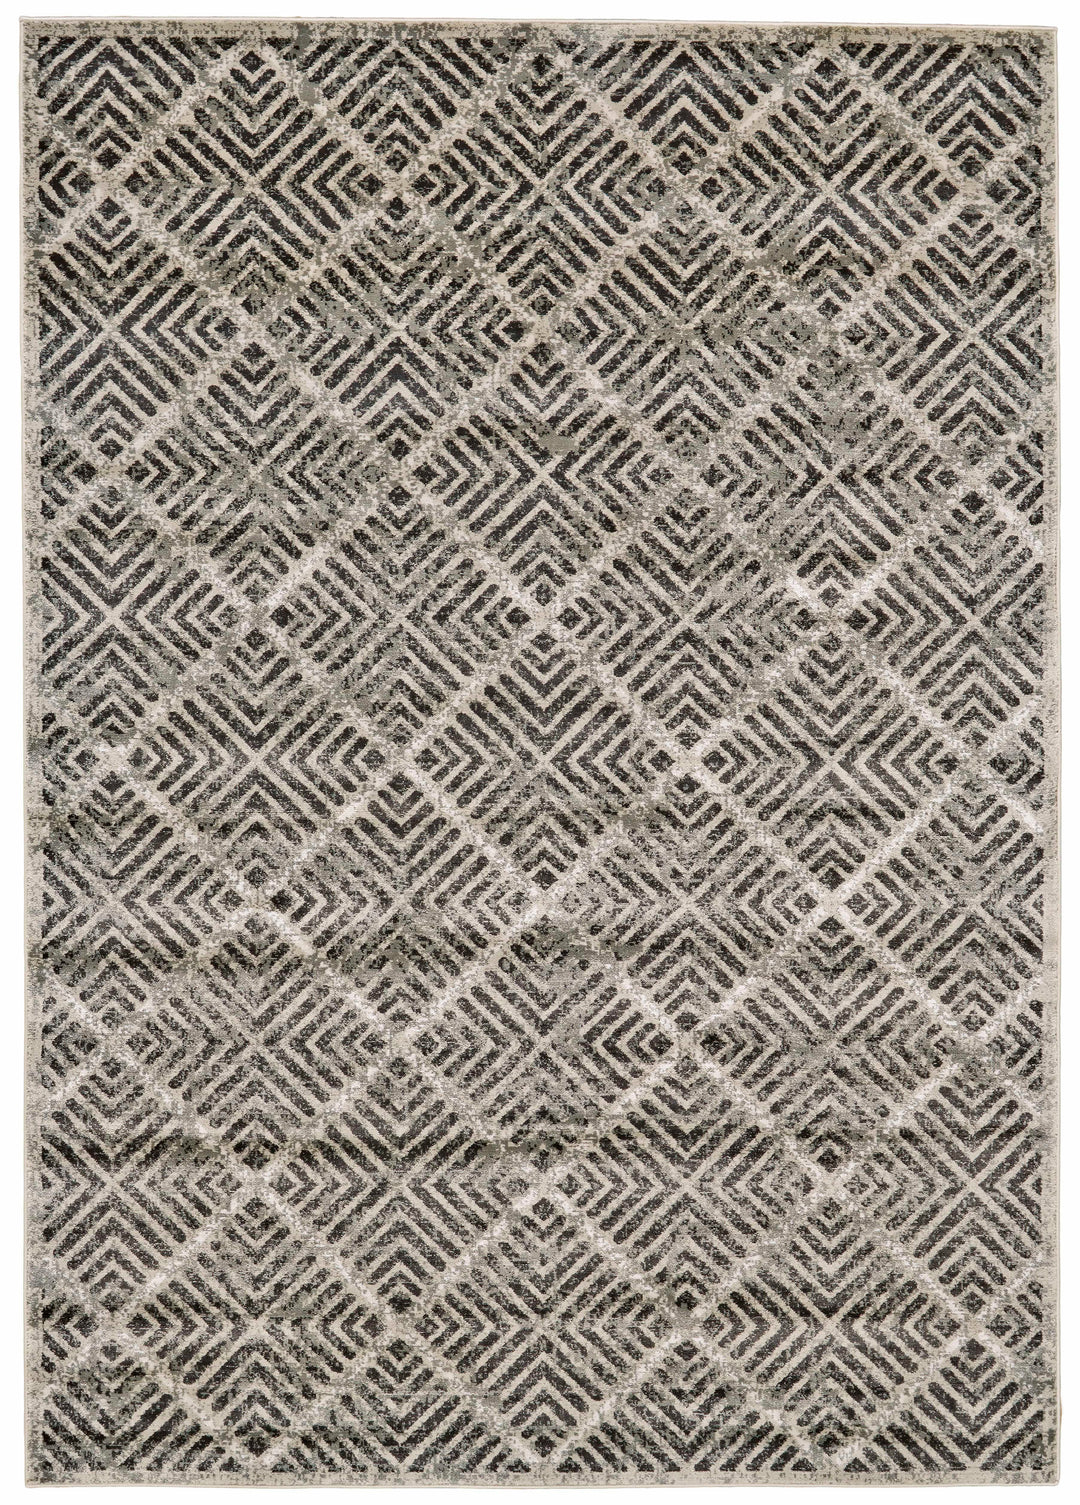 Feizy Feizy Katari Distressed Geometric Rug - Available in 8 Sizes - Gray & Taupe 4'-3" x 6'-3" 6613380FCASTPEC16